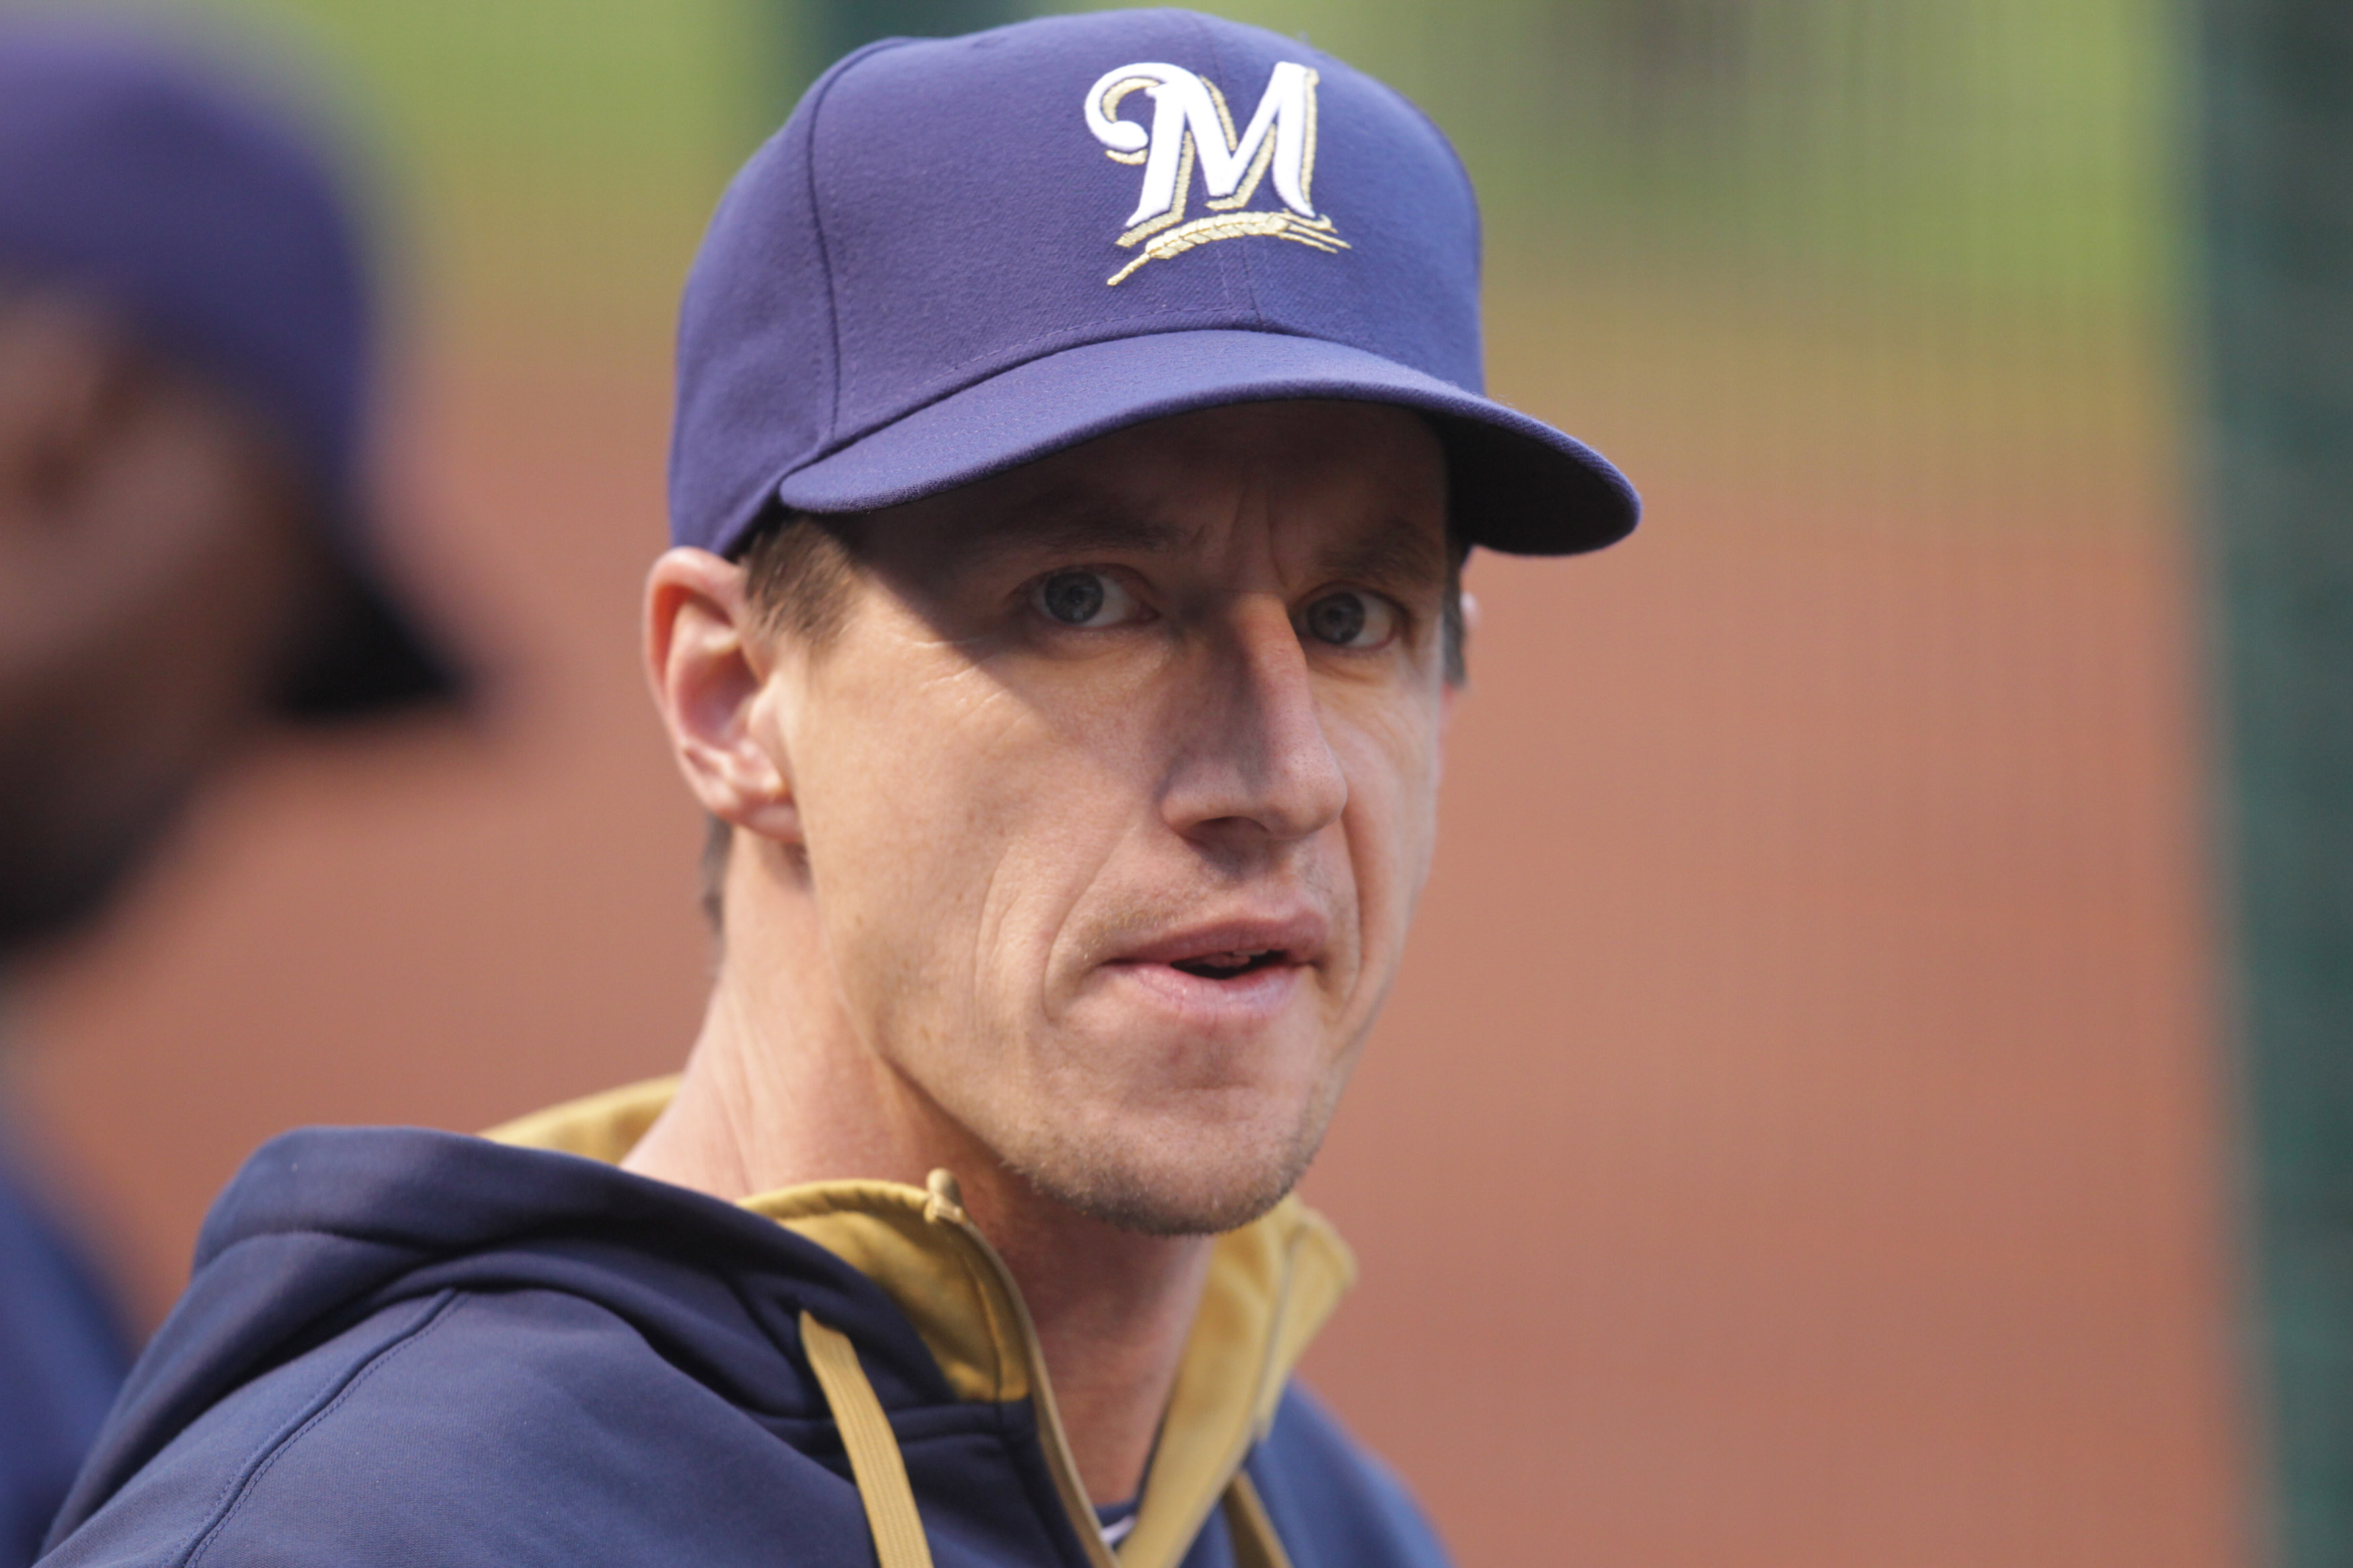 The Brewers love playing for manager Craig Counsell. Here's why.